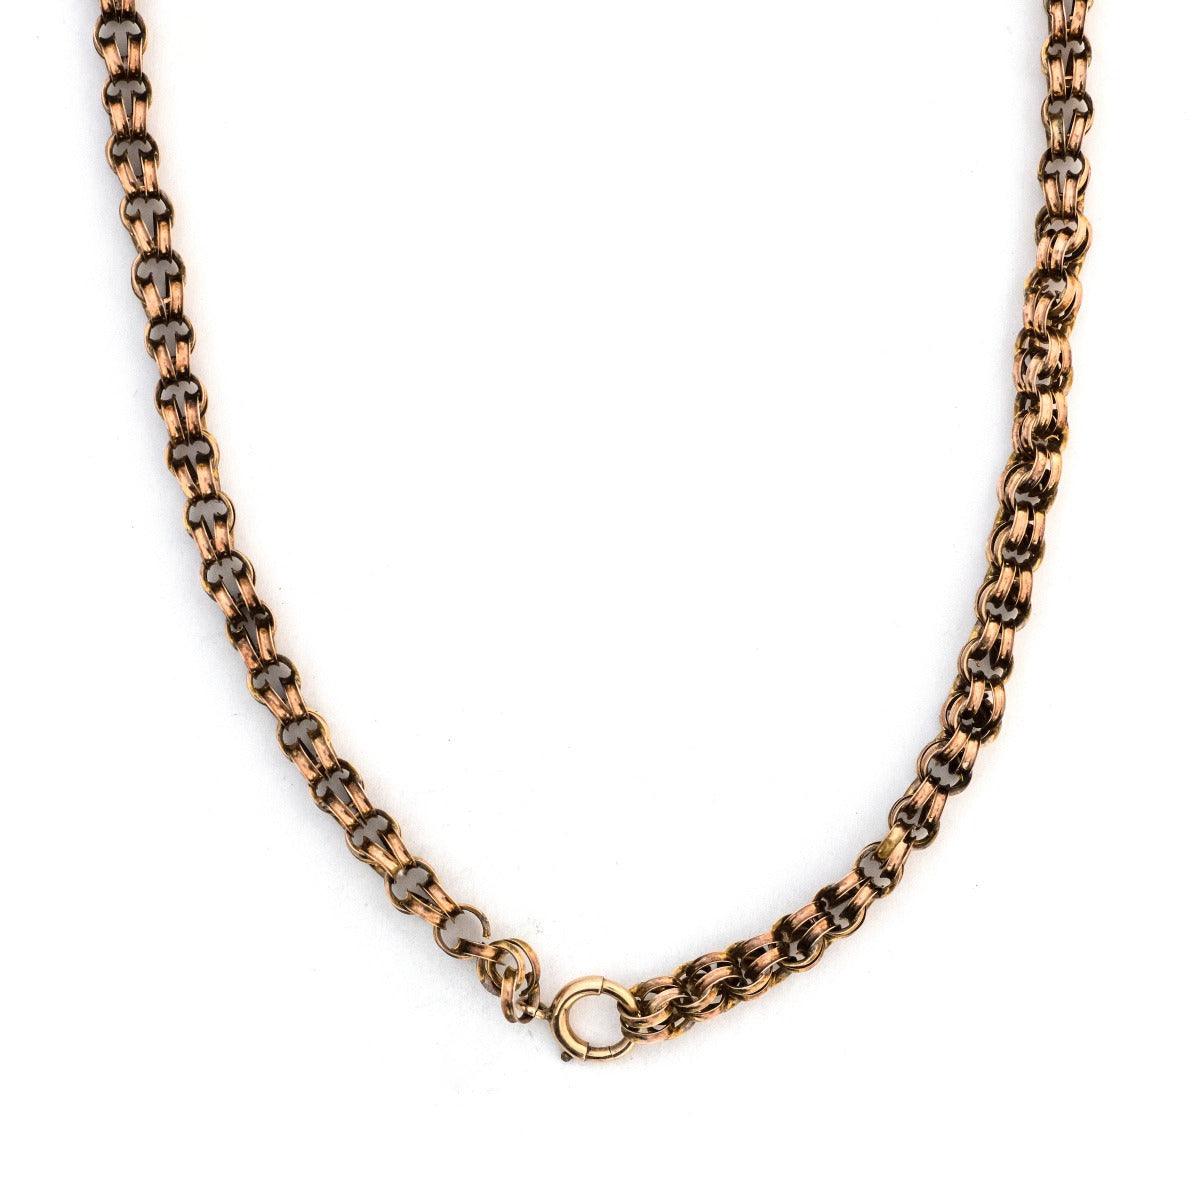 This vintage gold fill chain measures 16" in length and features a double cable link. This unique piece is striking on its own or a great layering piece. Close up view, showing clasp